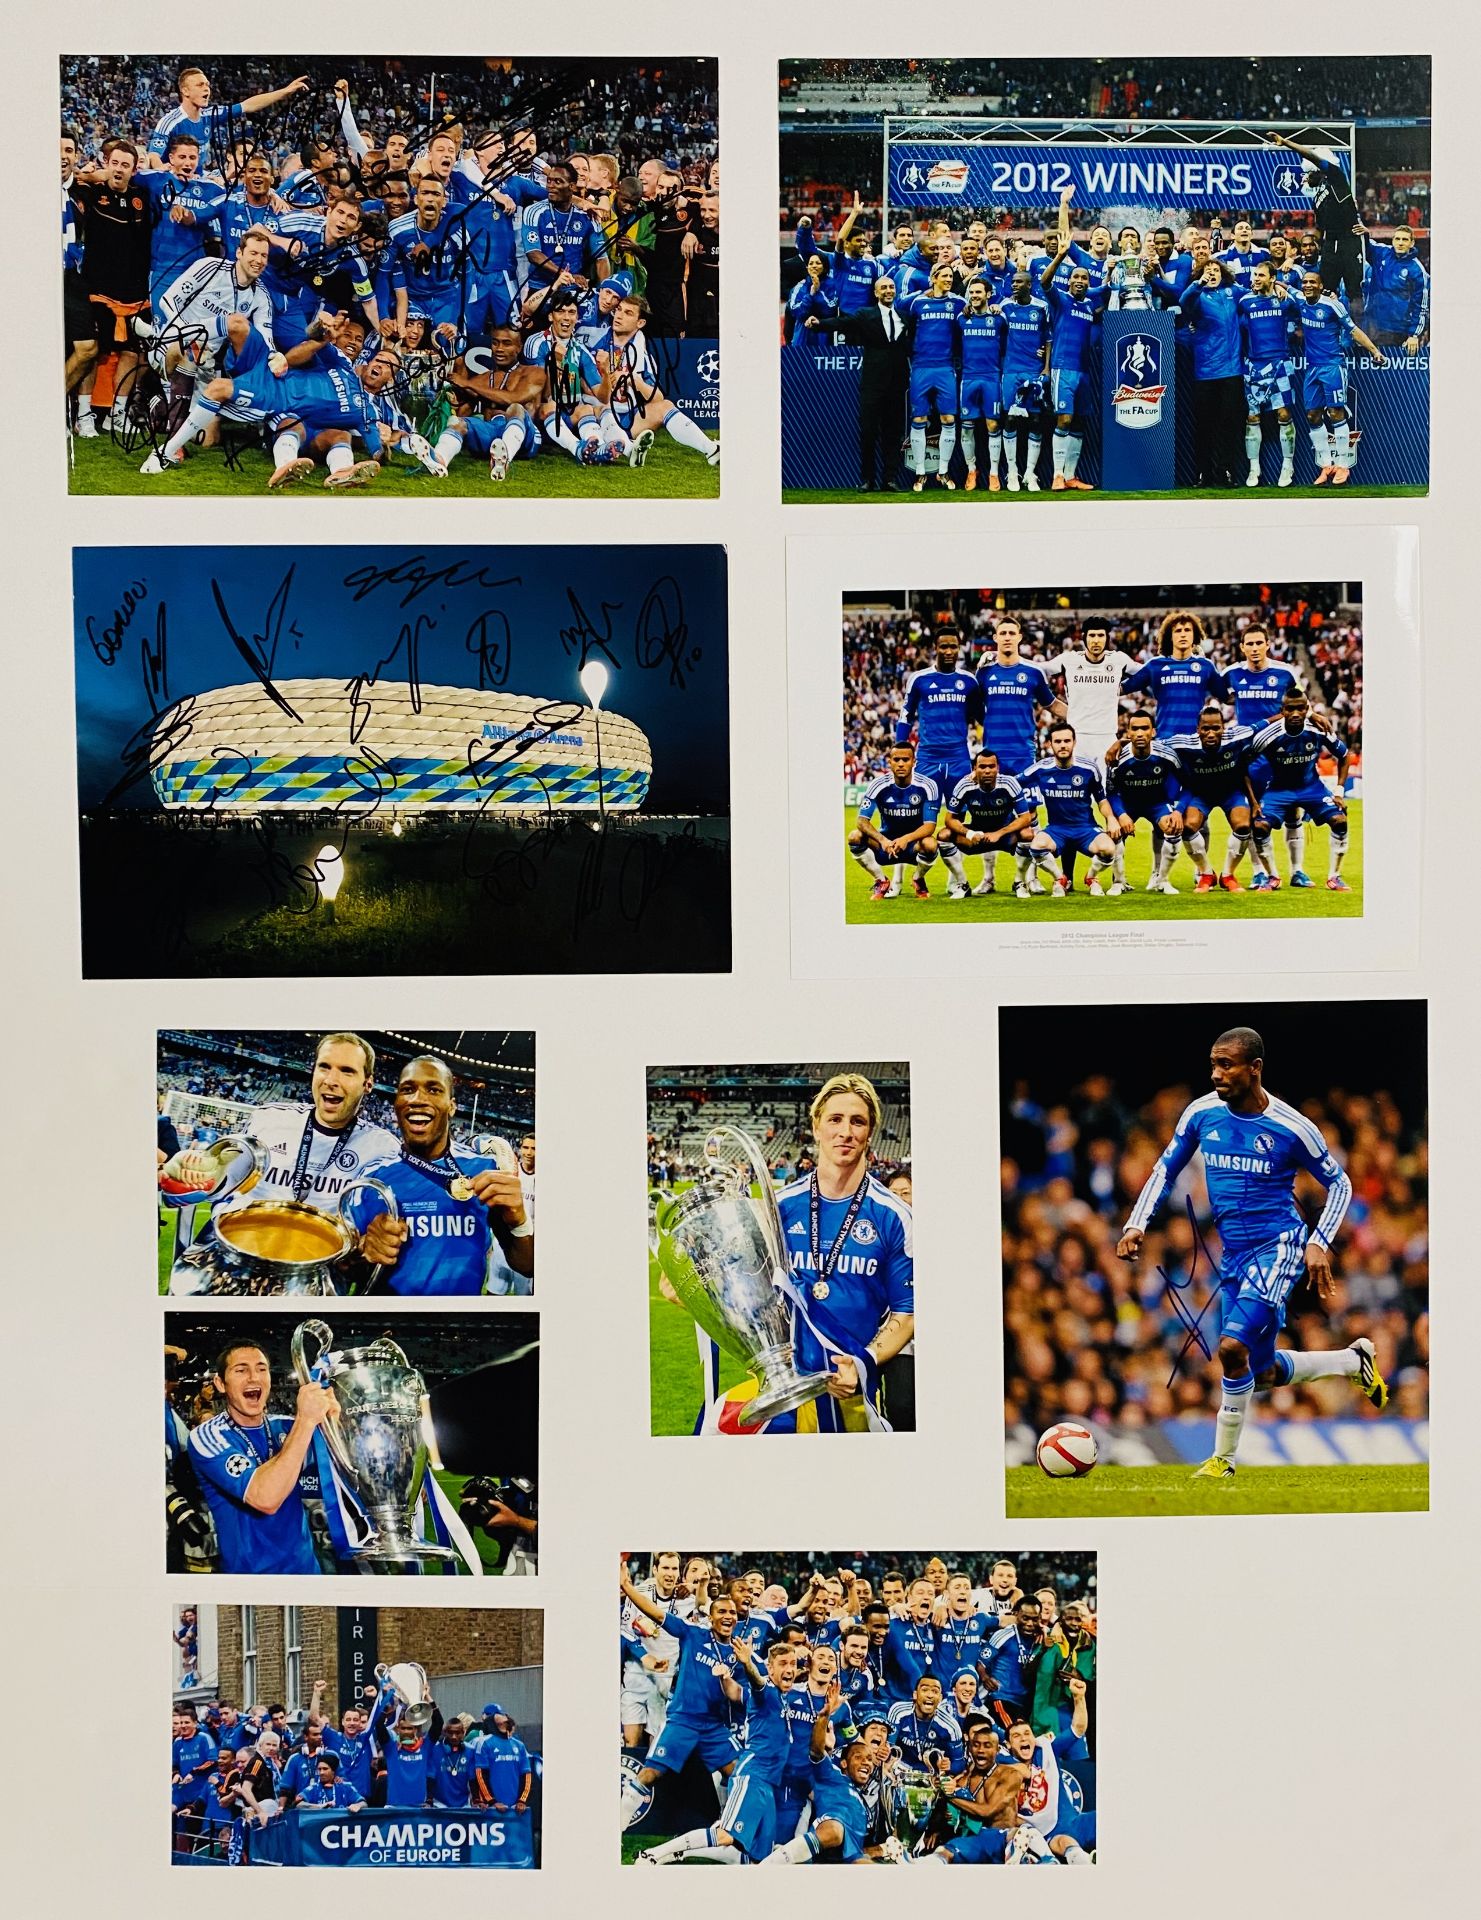 Chelsea 2011/12 Champions League winners signed jersey - Image 3 of 3